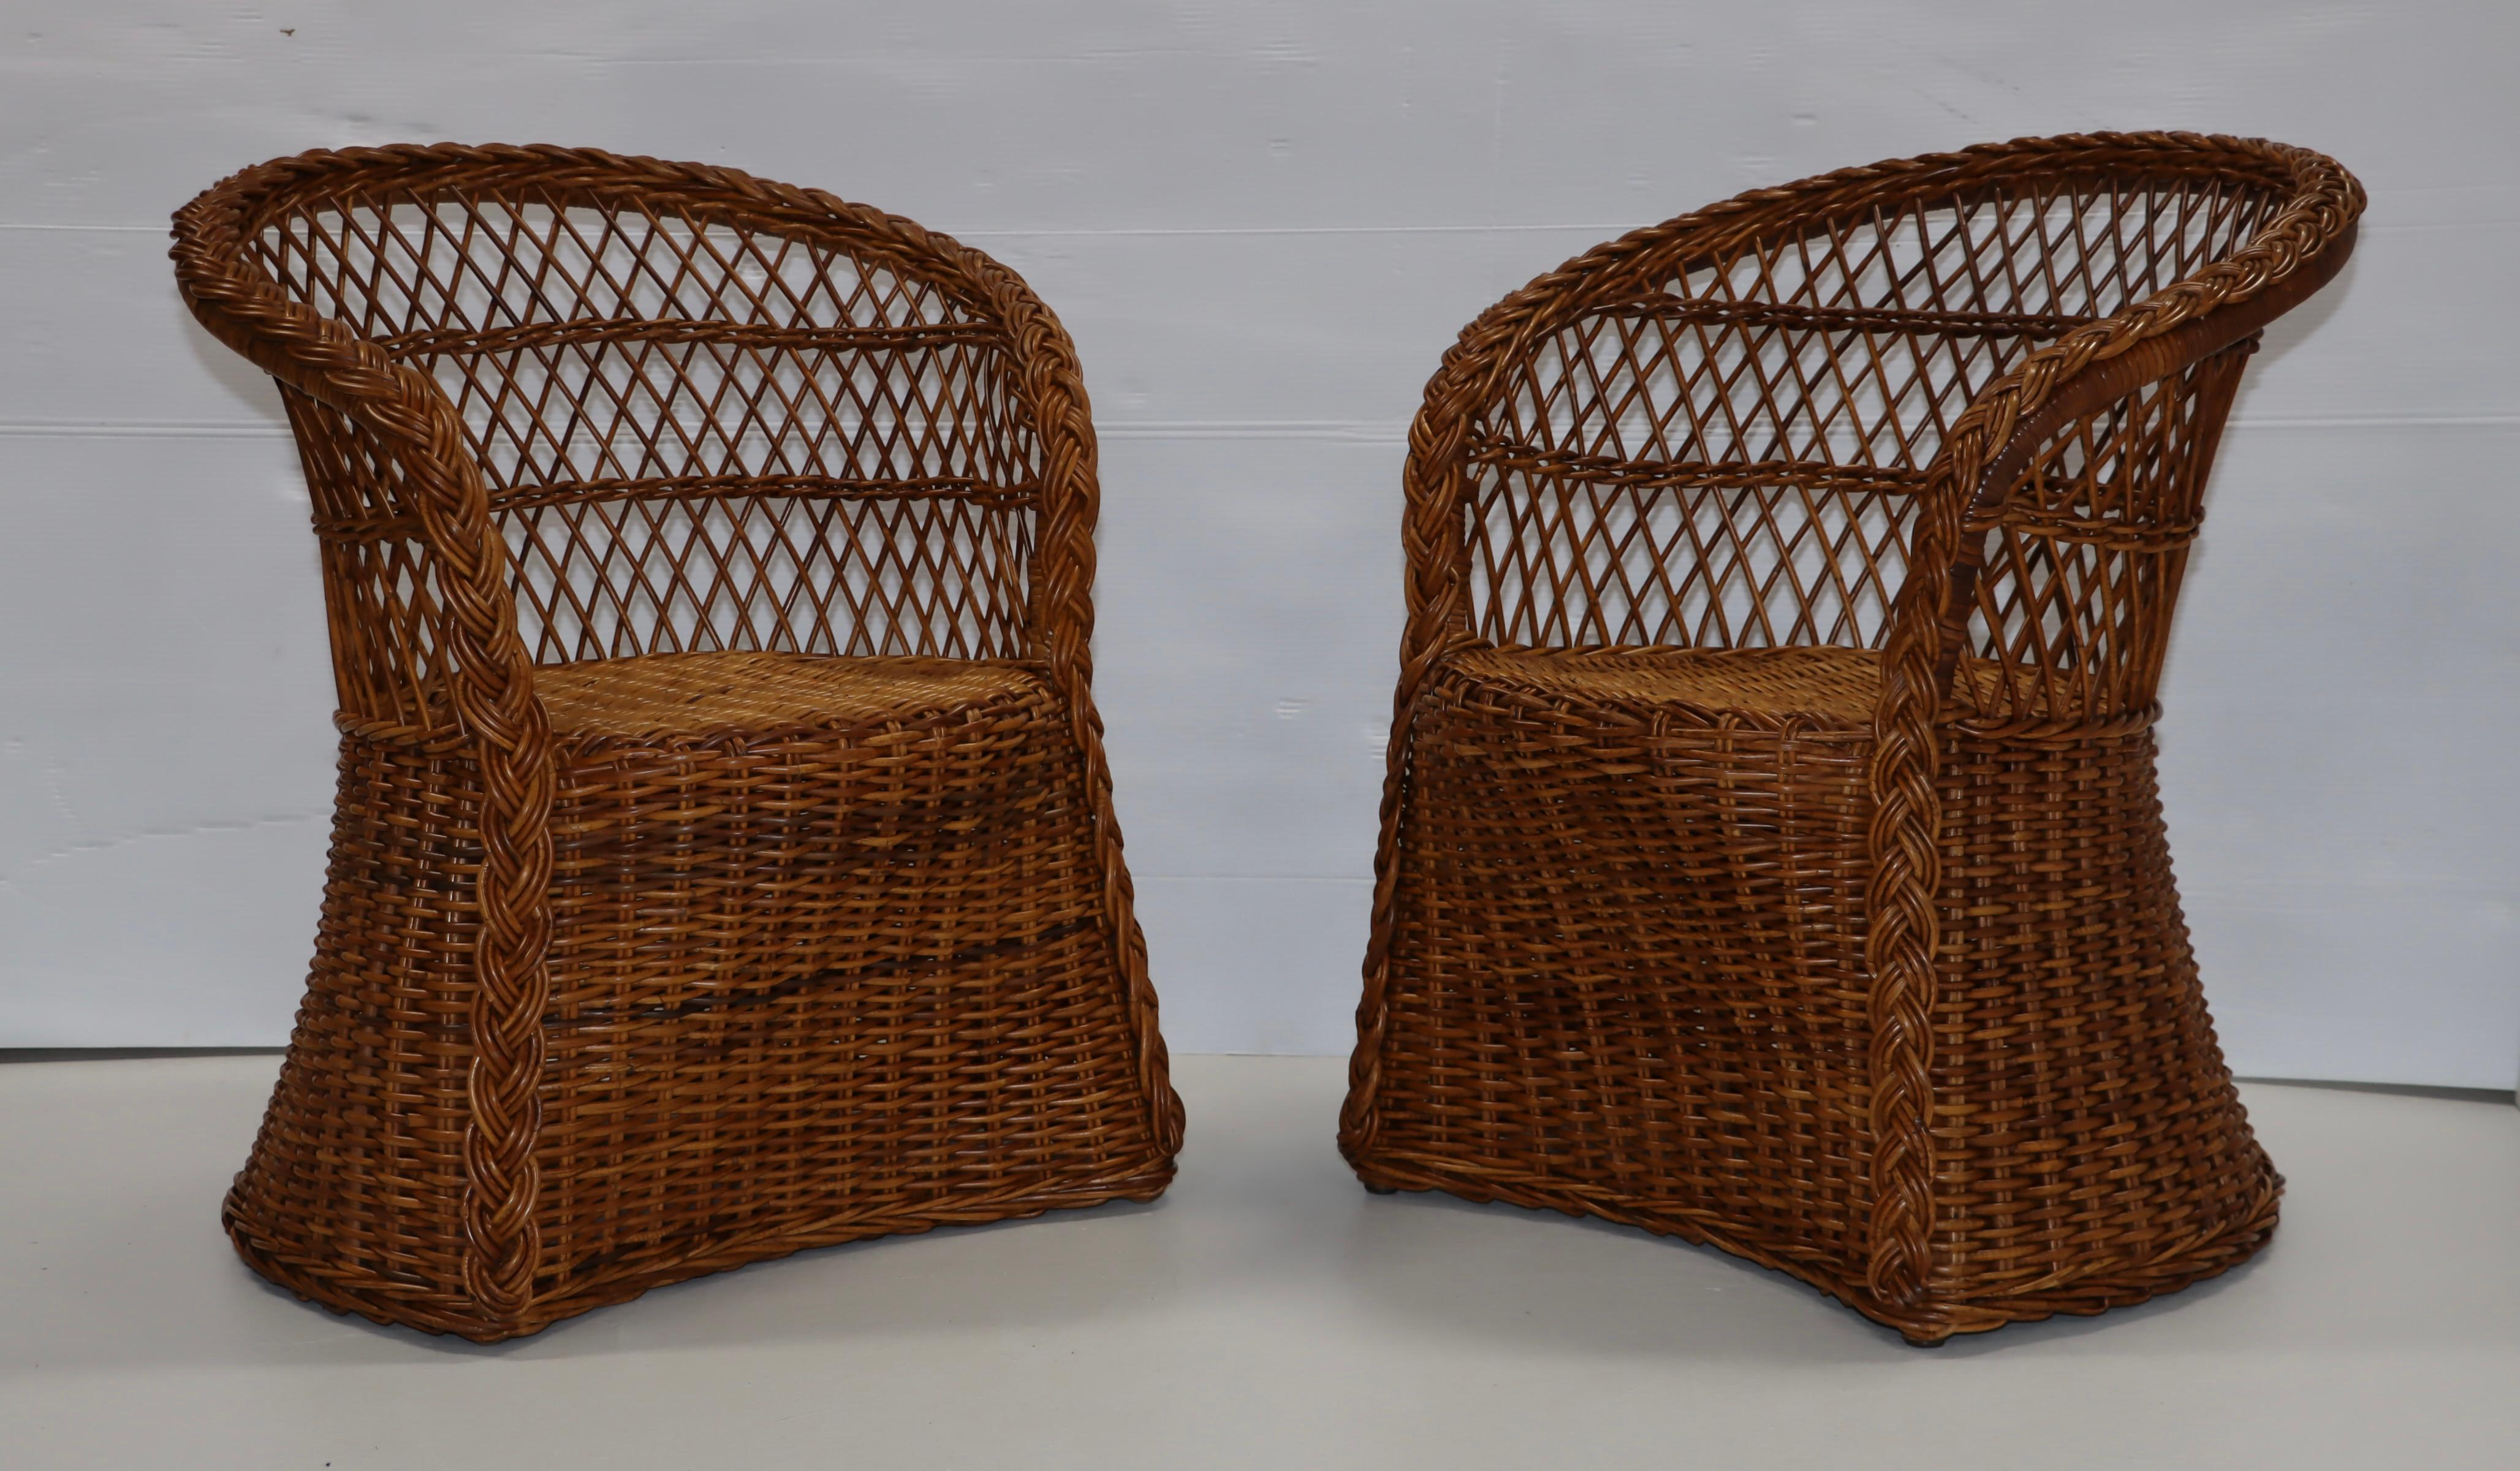 1960's modern Italian rattan lounge chairs with new Bouclé fabric upholstery, lightly restored with minor wear and patina due to age and use.